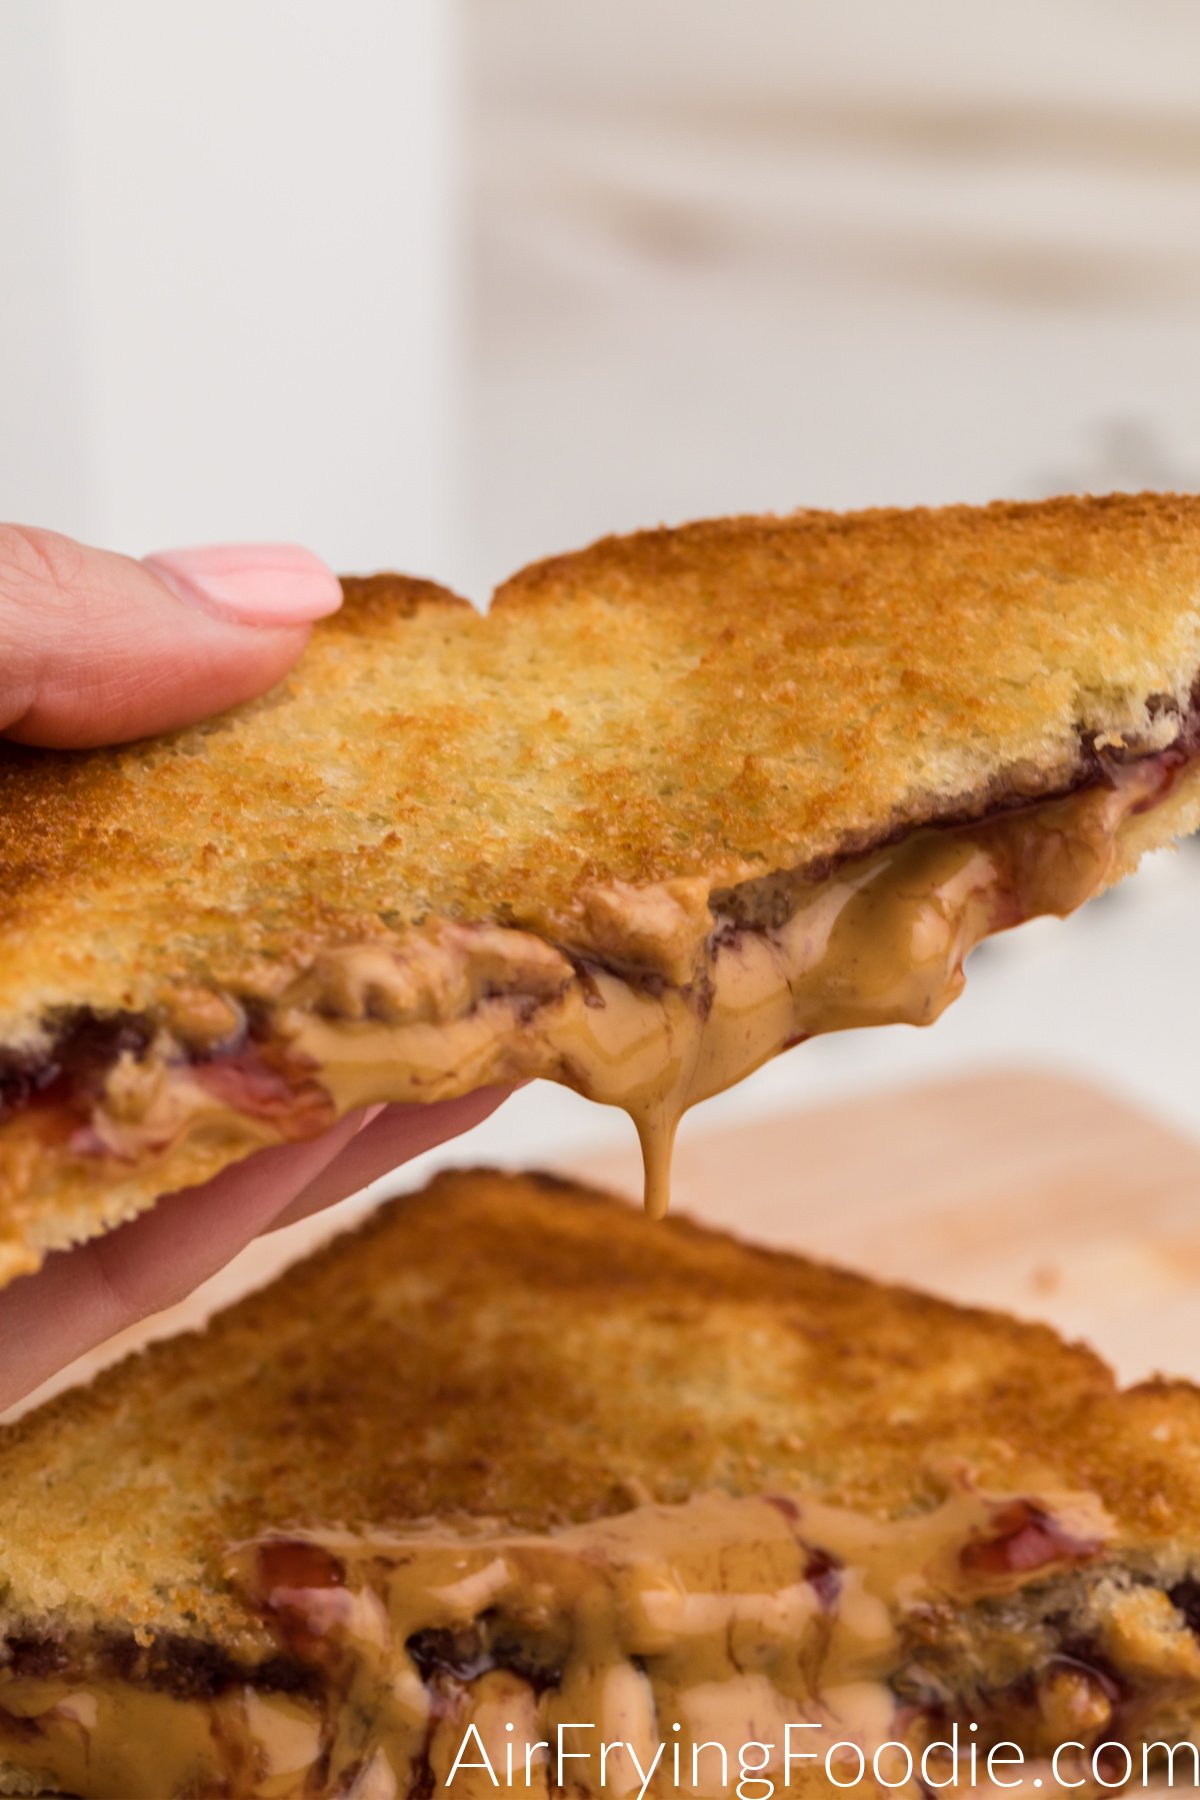 Hand holing a dripping melted peanut butter and jelly from a cut sandwich.